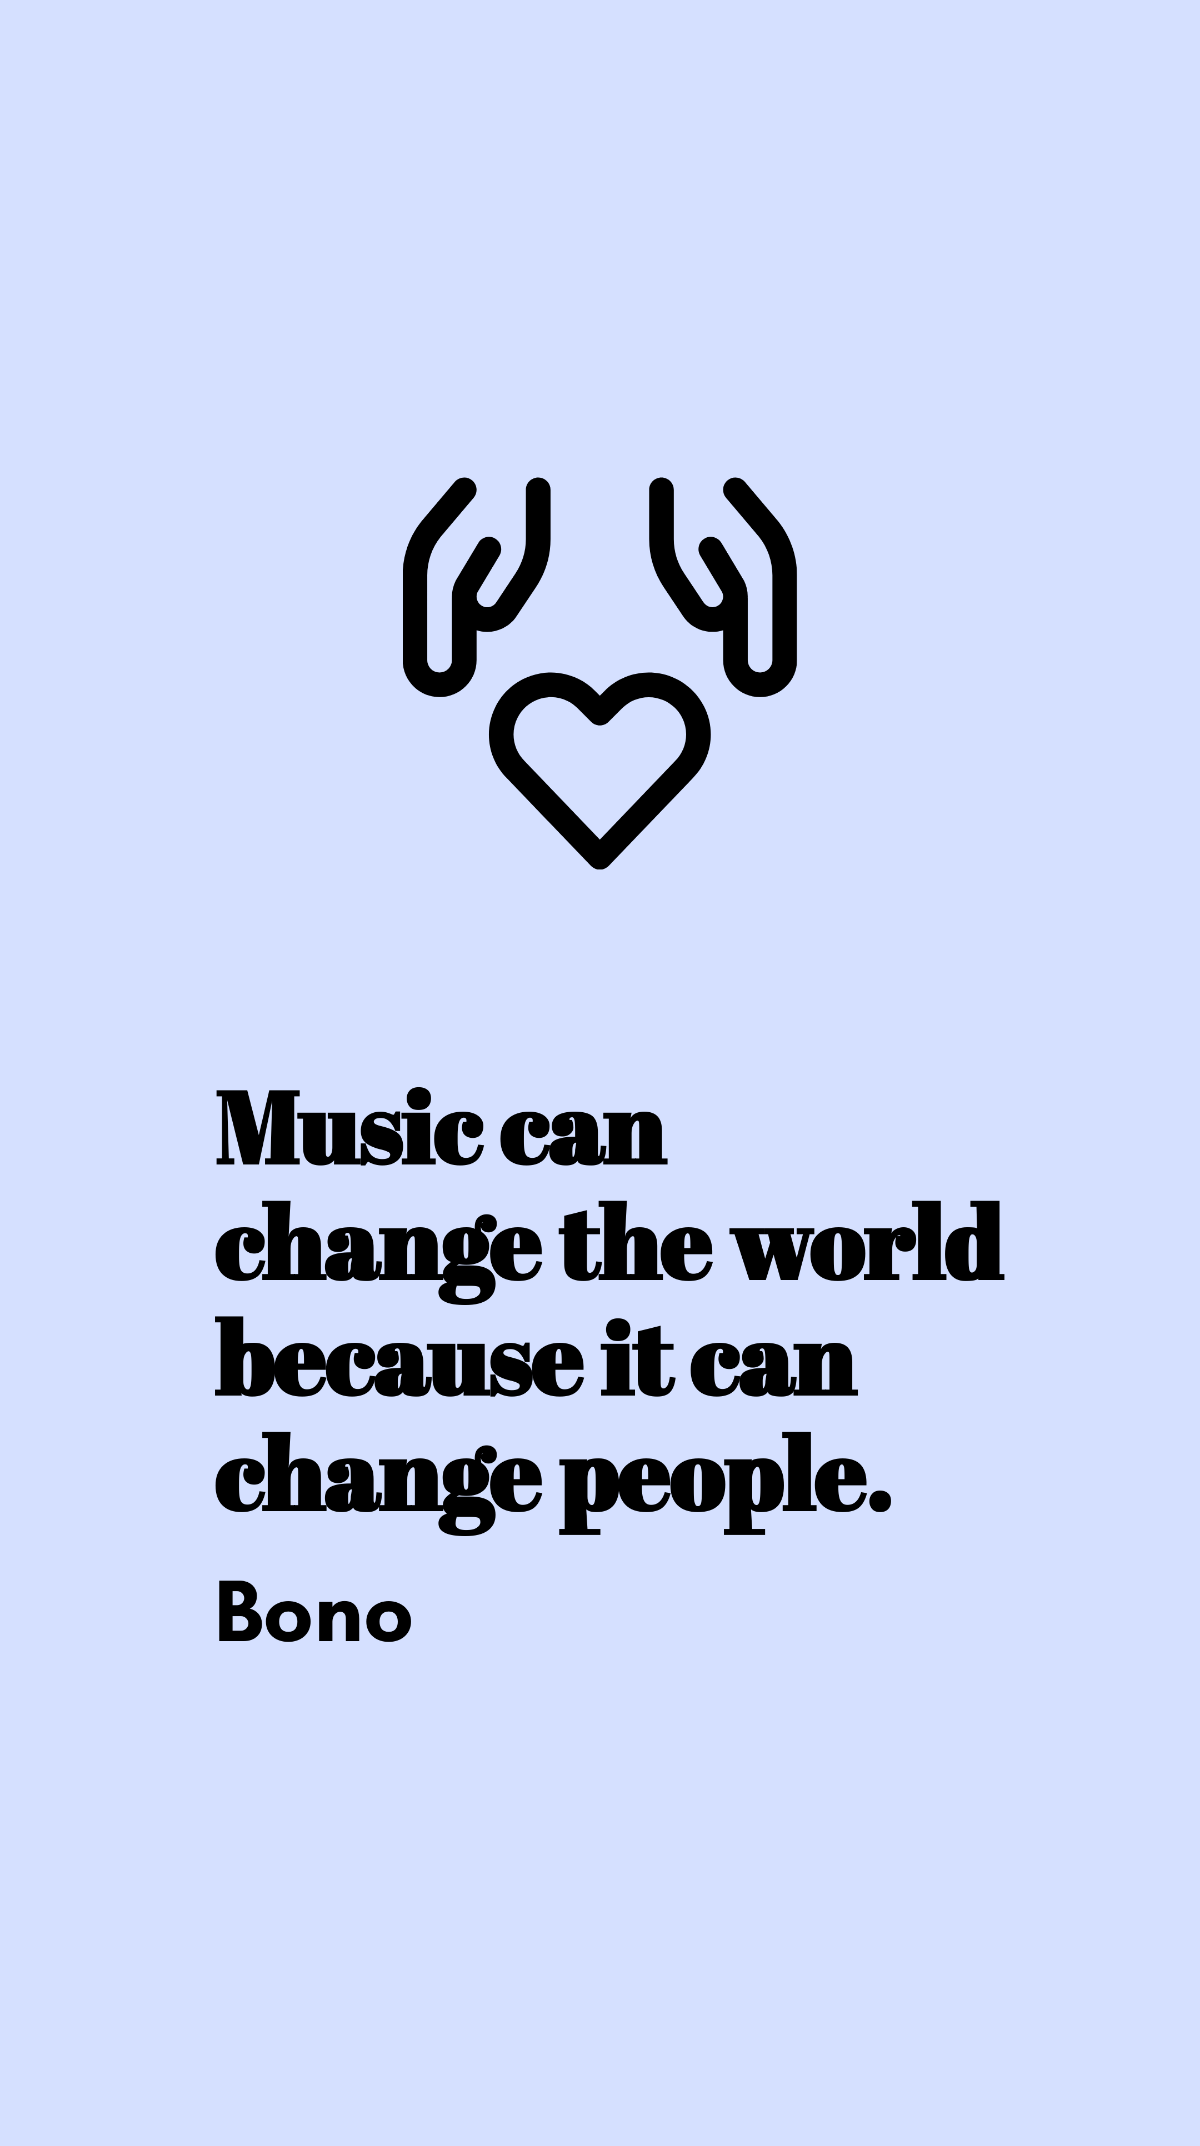 Bono - Music can change the world because it can change people.